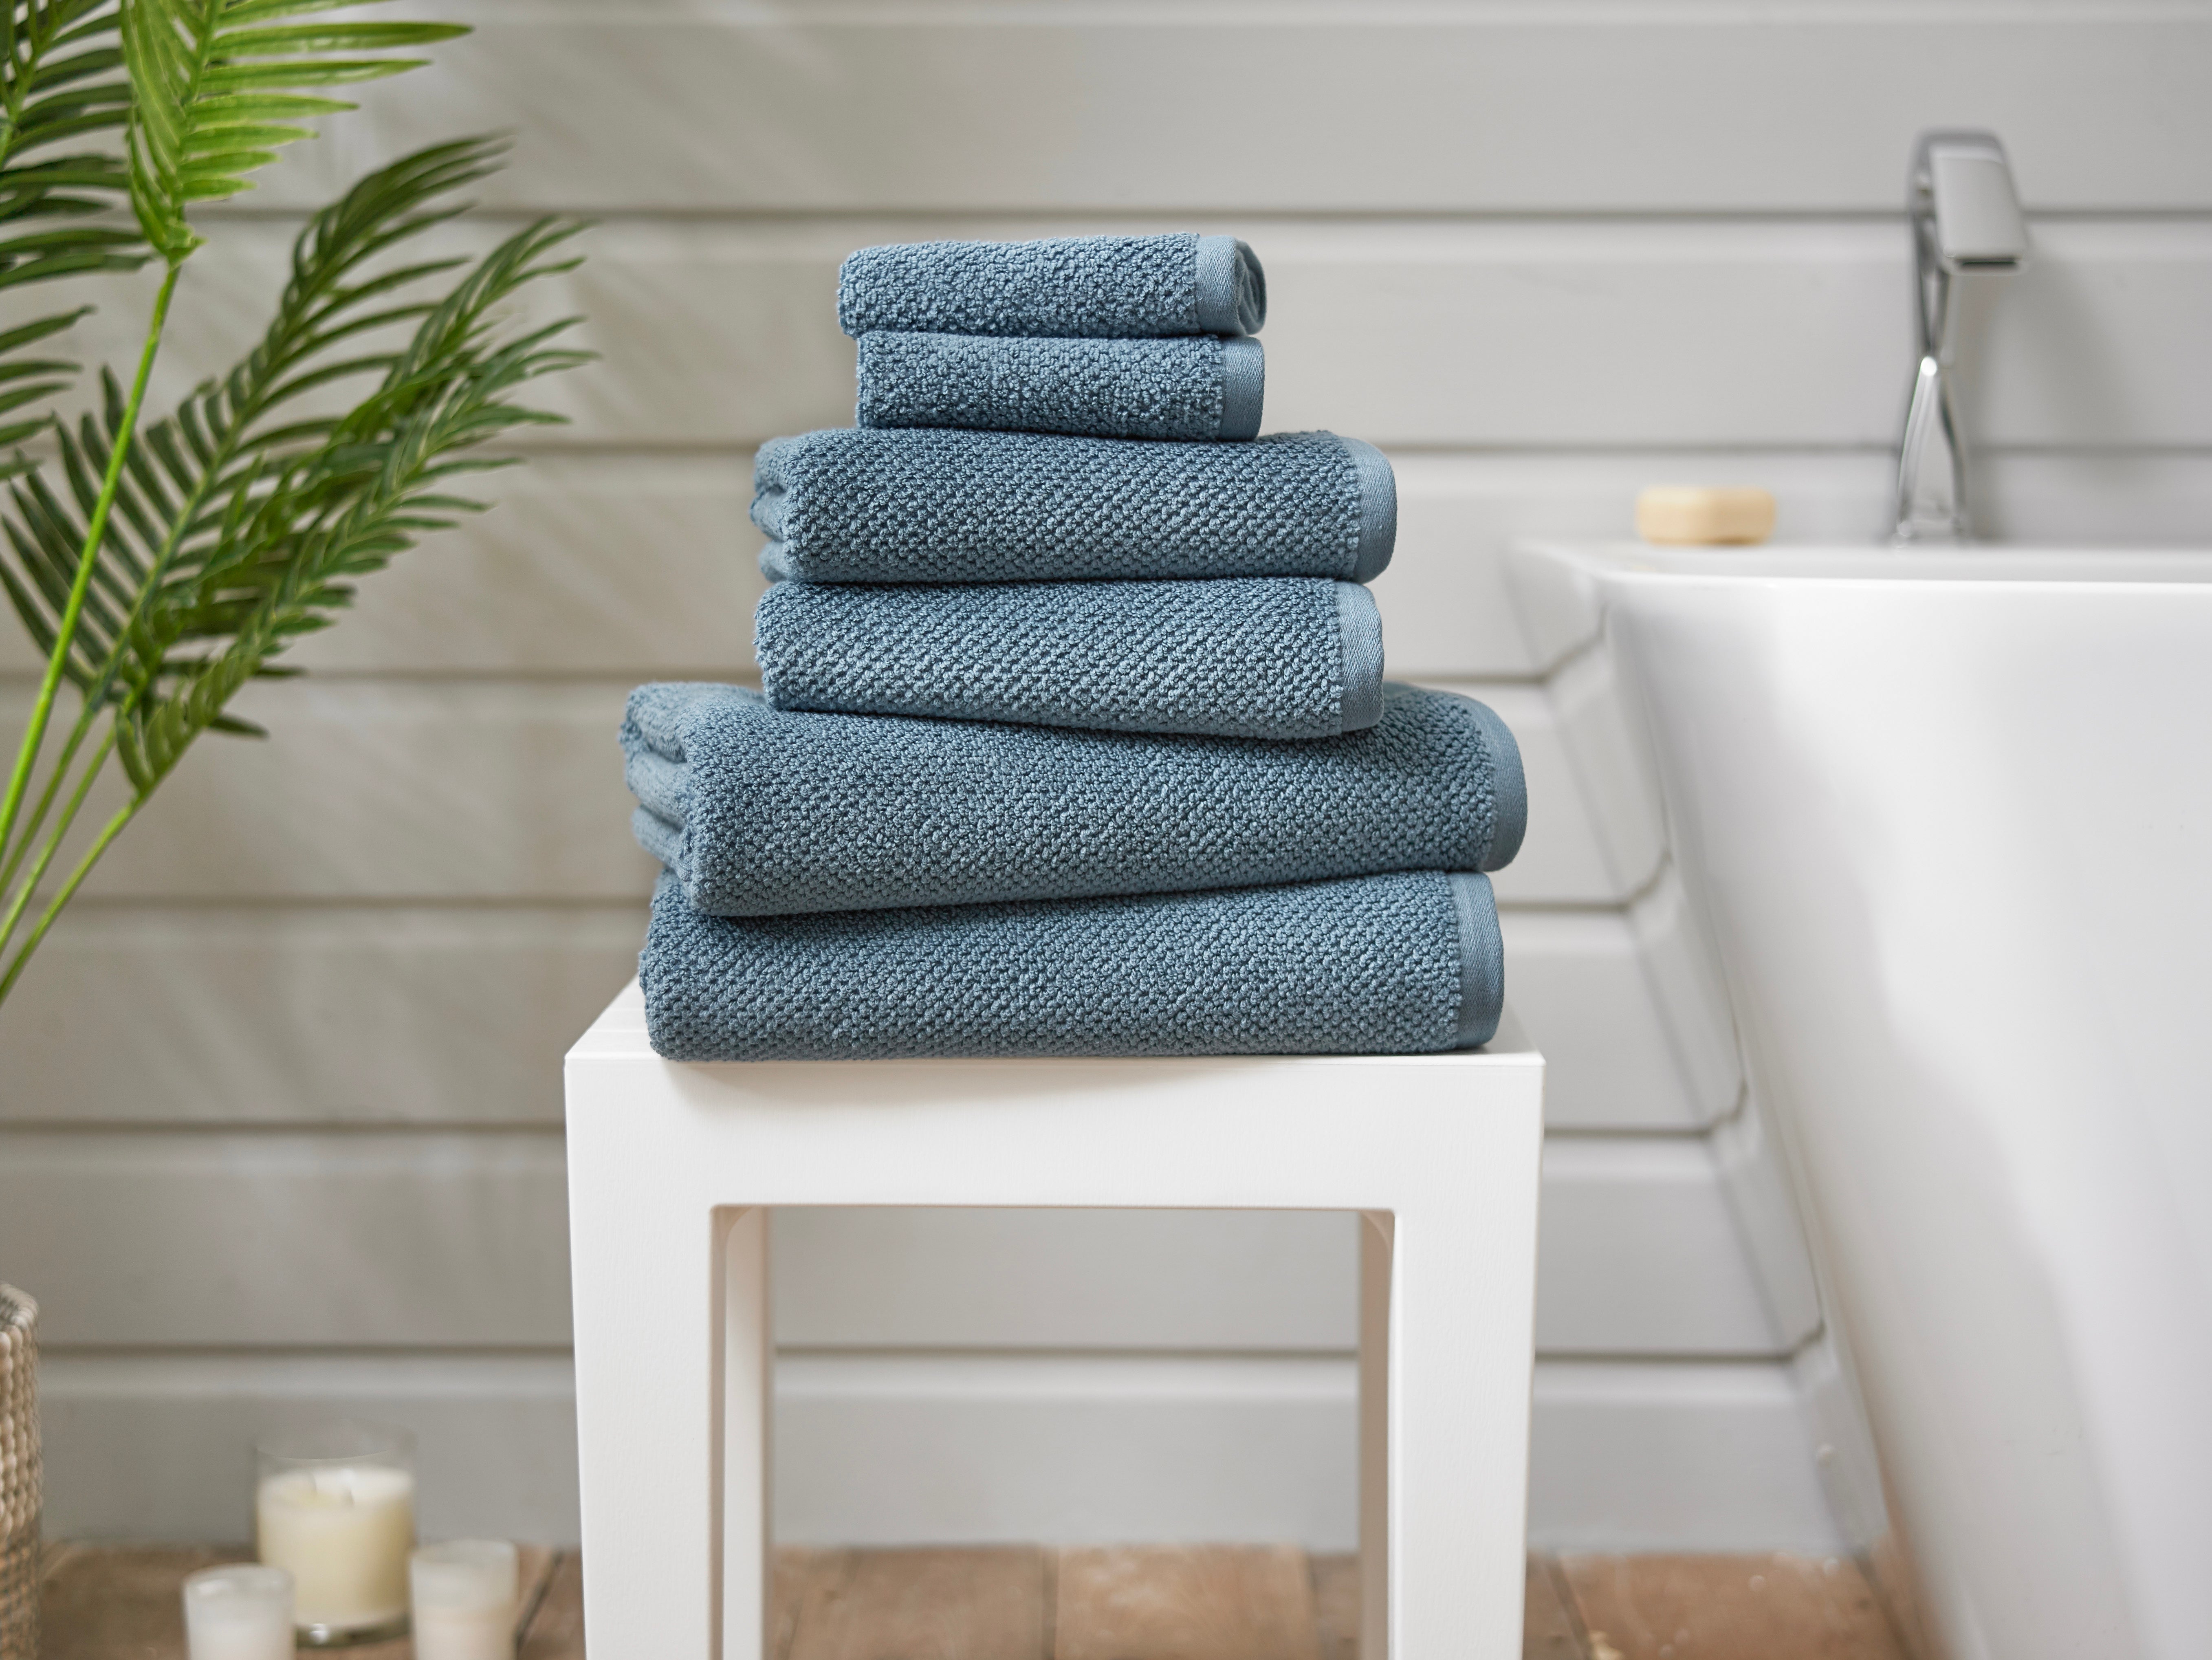 Quik Dri Romeo Towel Denim | Affordable And Great Quality | Terrys